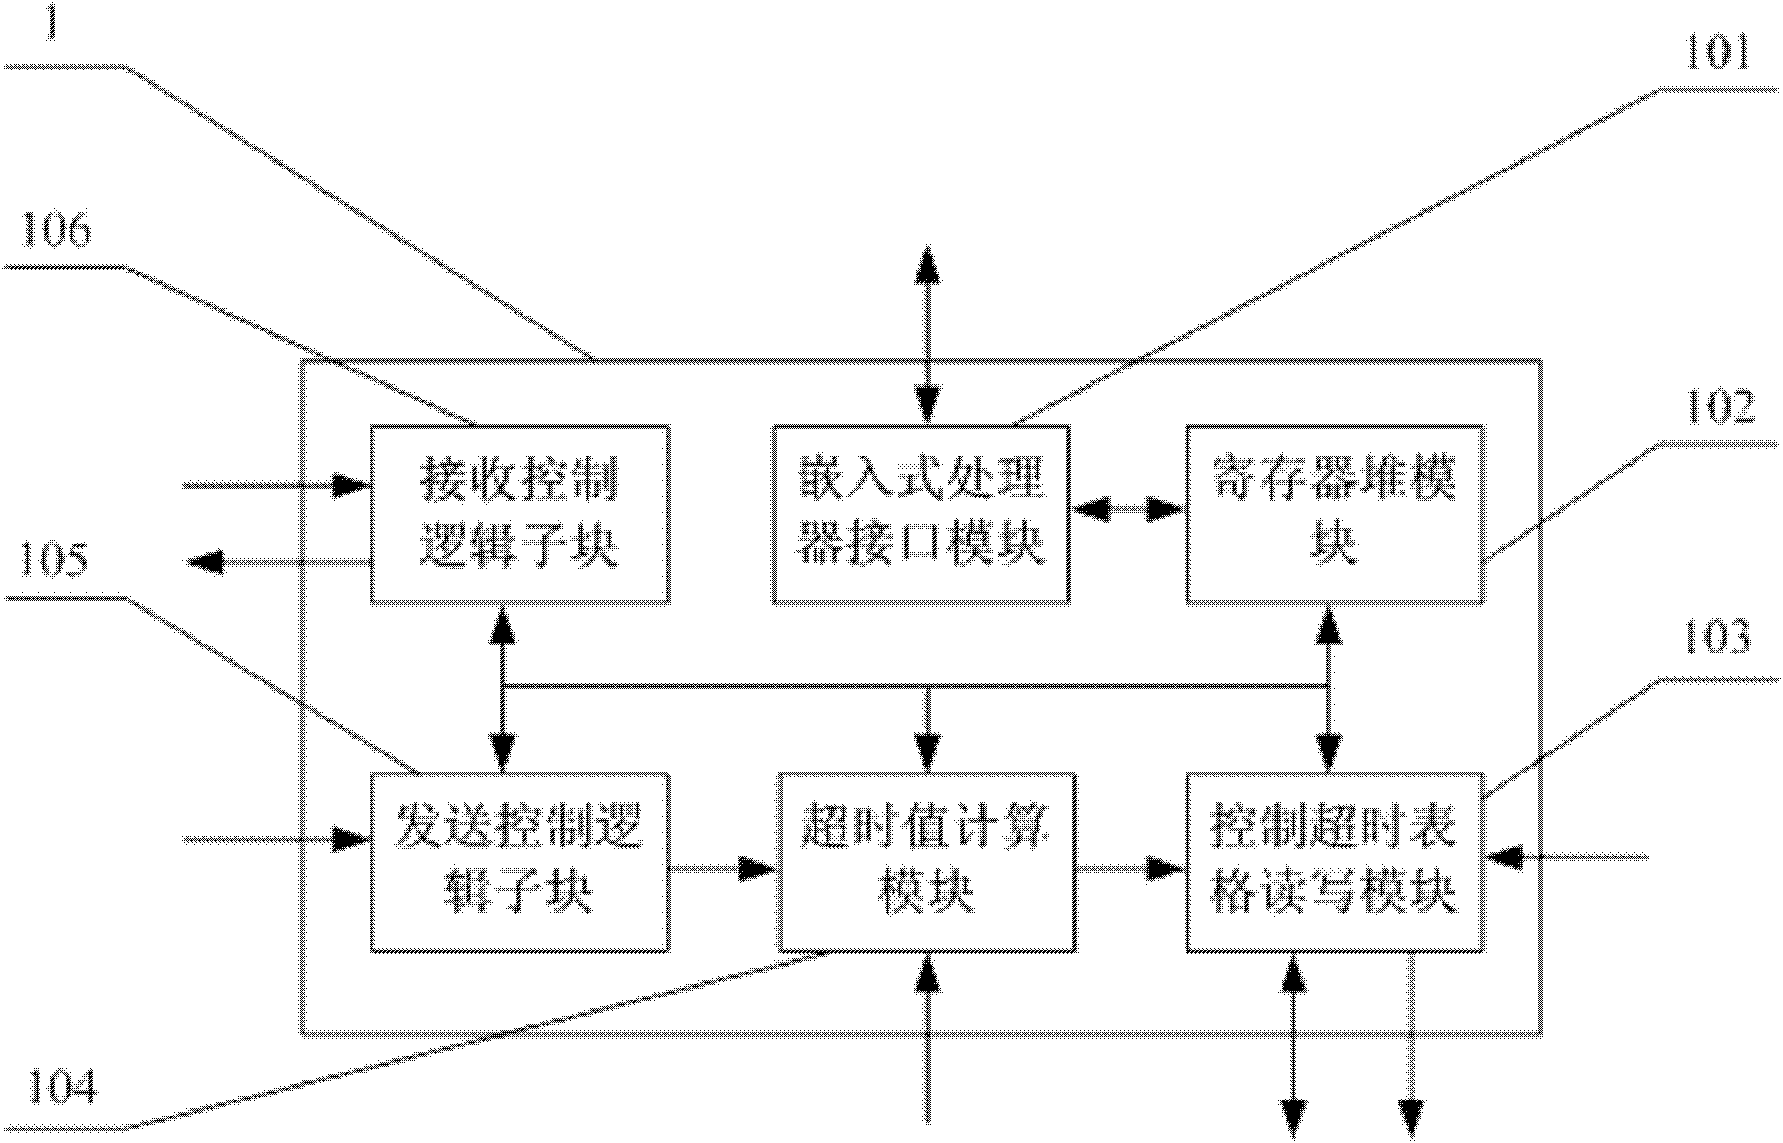 Hardware design structure of overtime timer in communication protocol processor